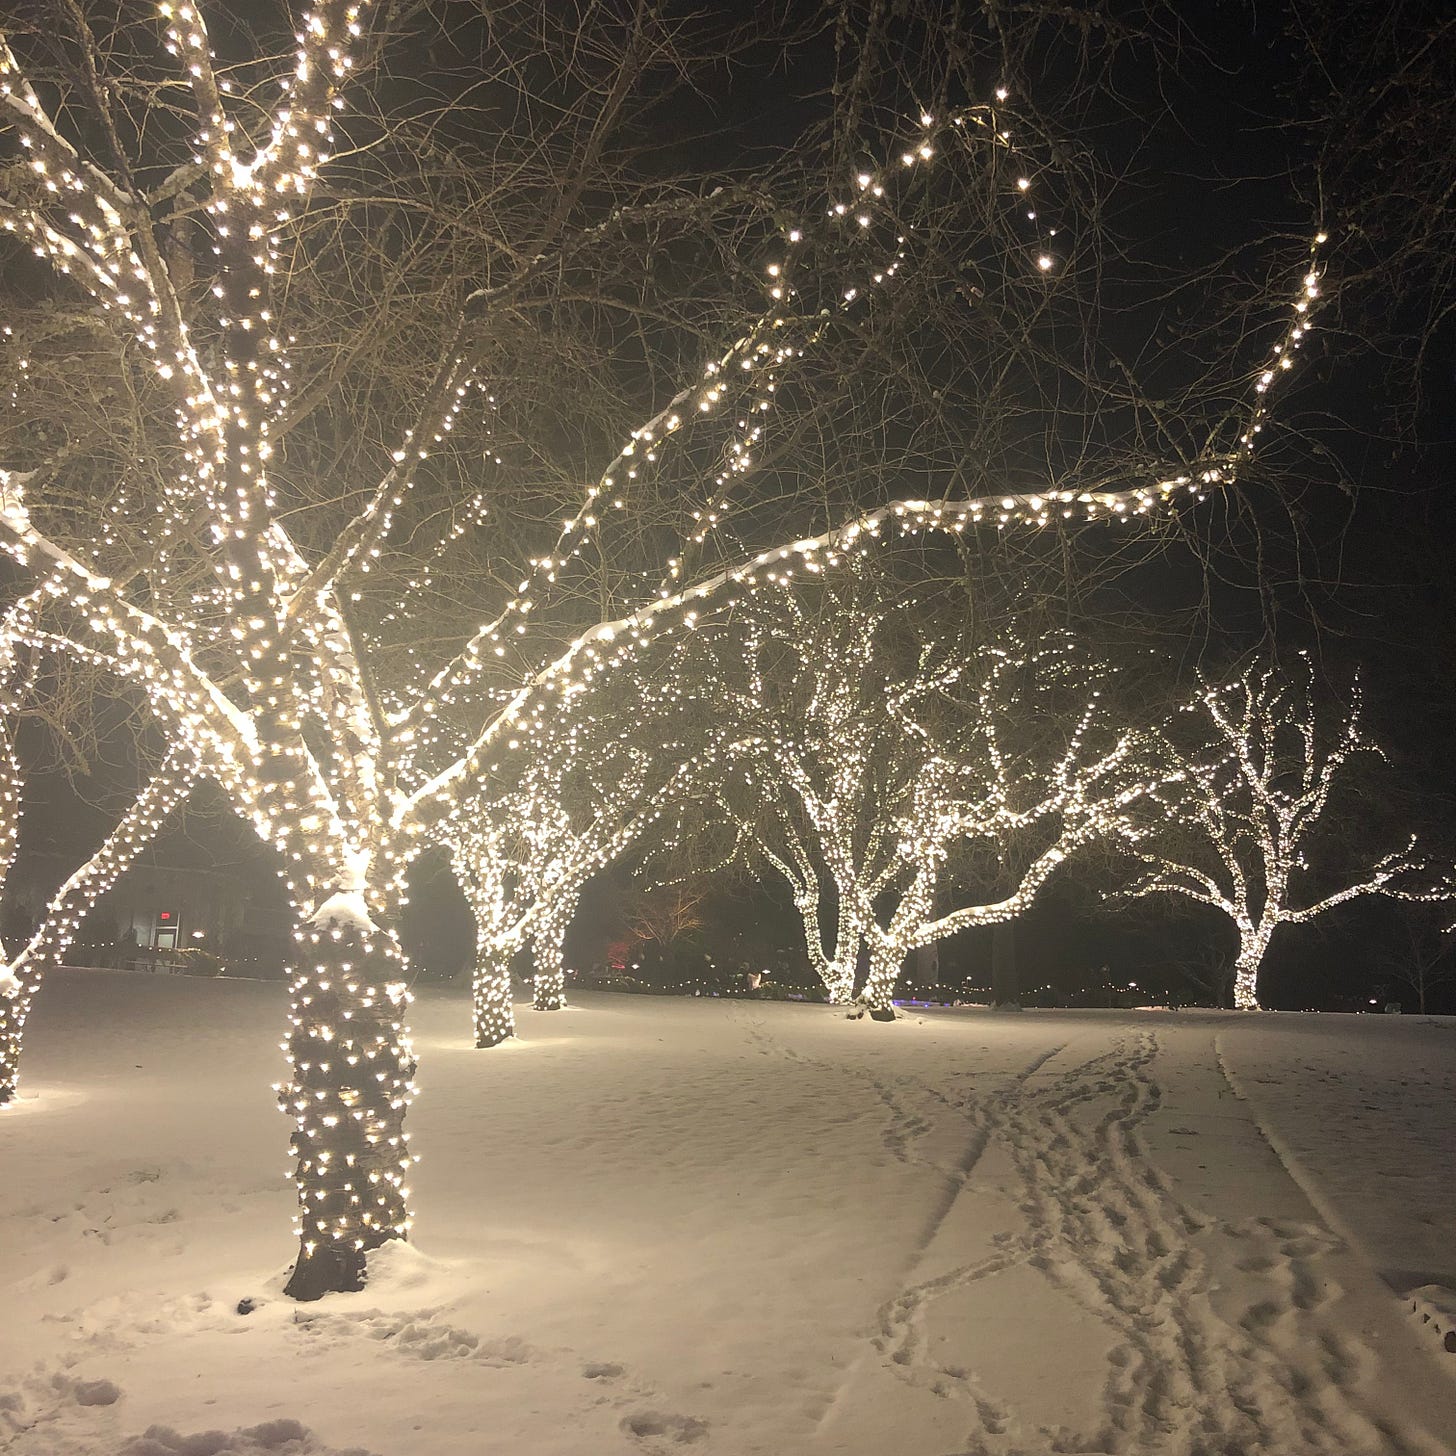 Trees with white Christmas lights